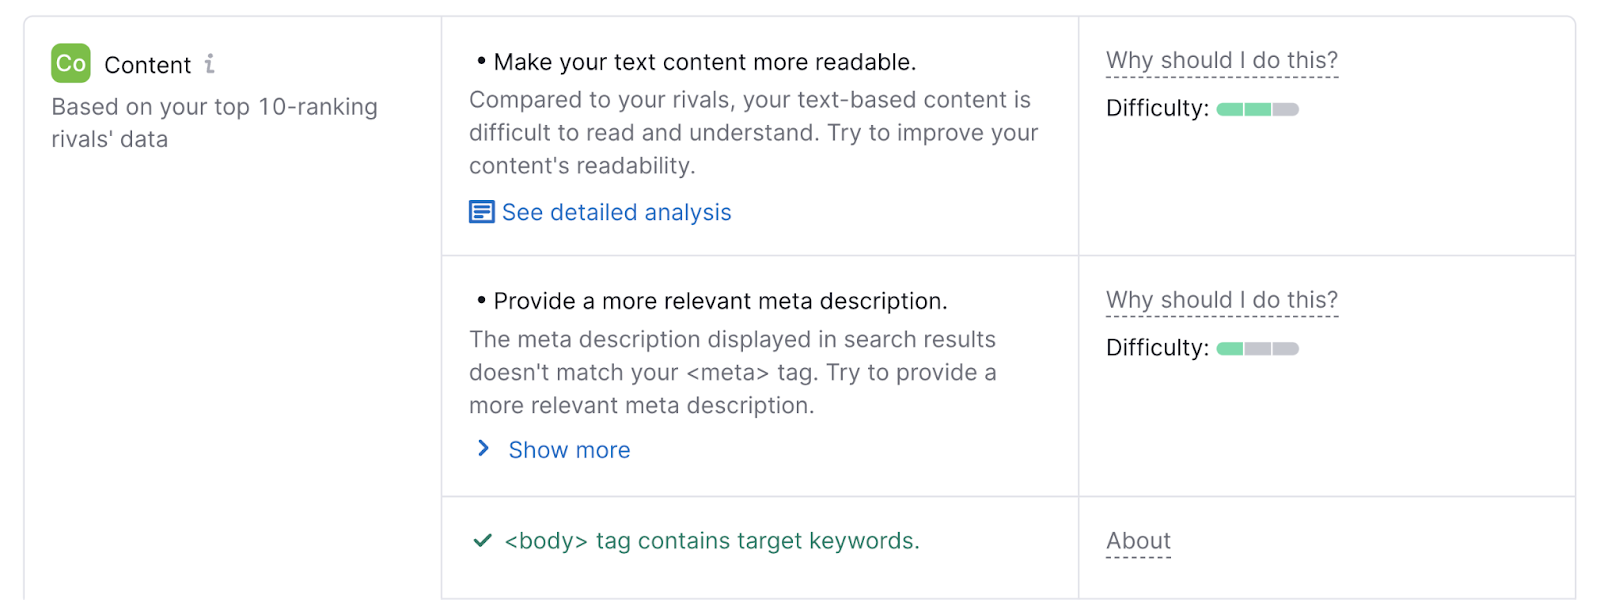 content optimization ideas see  making substance   much  readable and proving much  applicable  meta descriptions